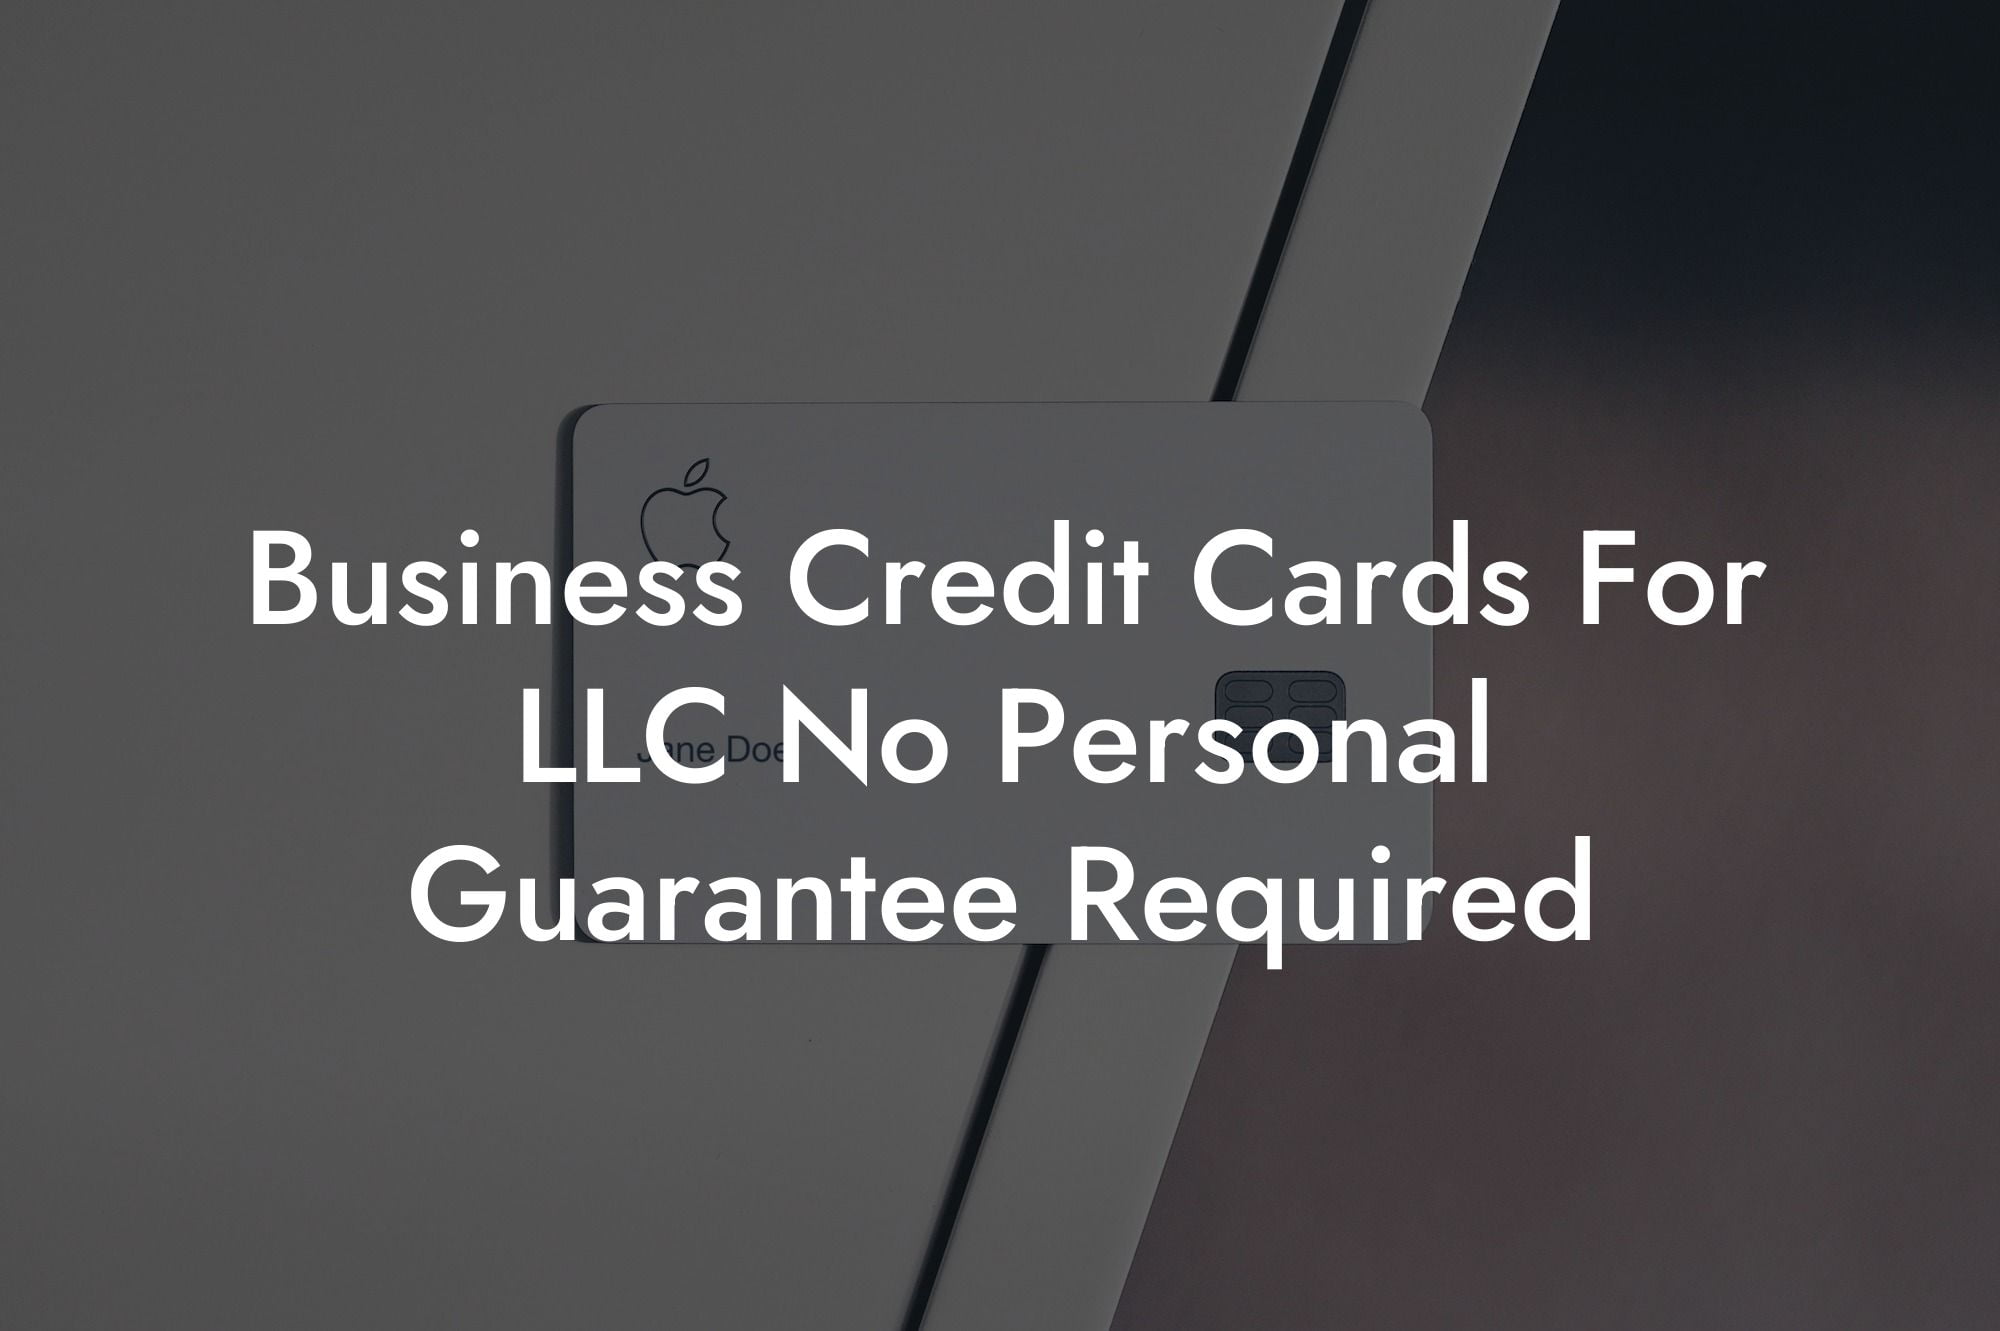 Business Credit Cards For LLC No Personal Guarantee Required